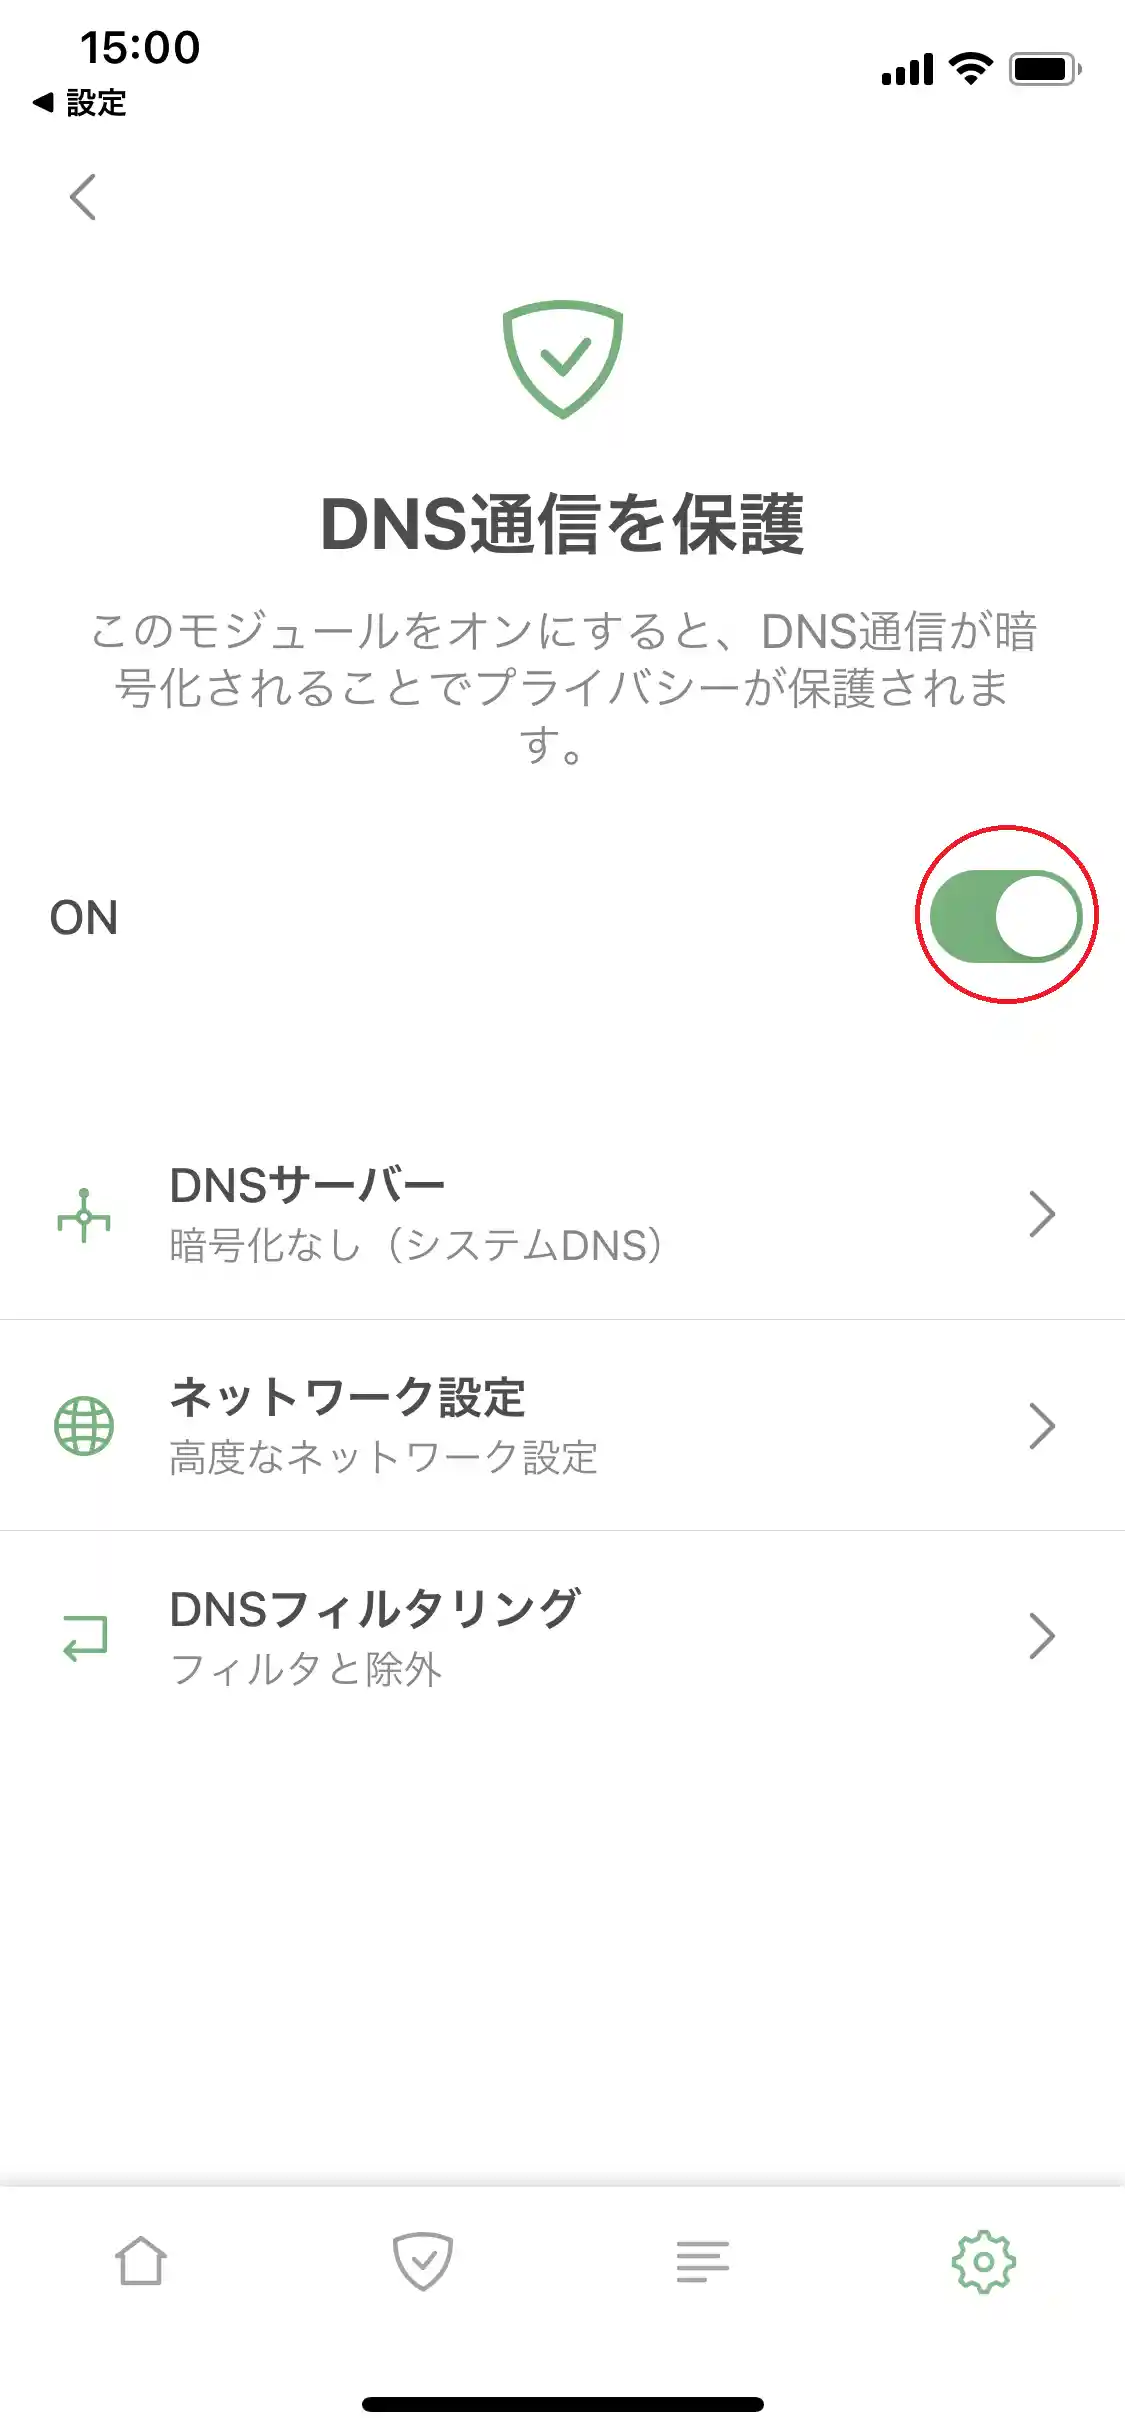 adguard_pro_03_DNS通信を保護_01.png